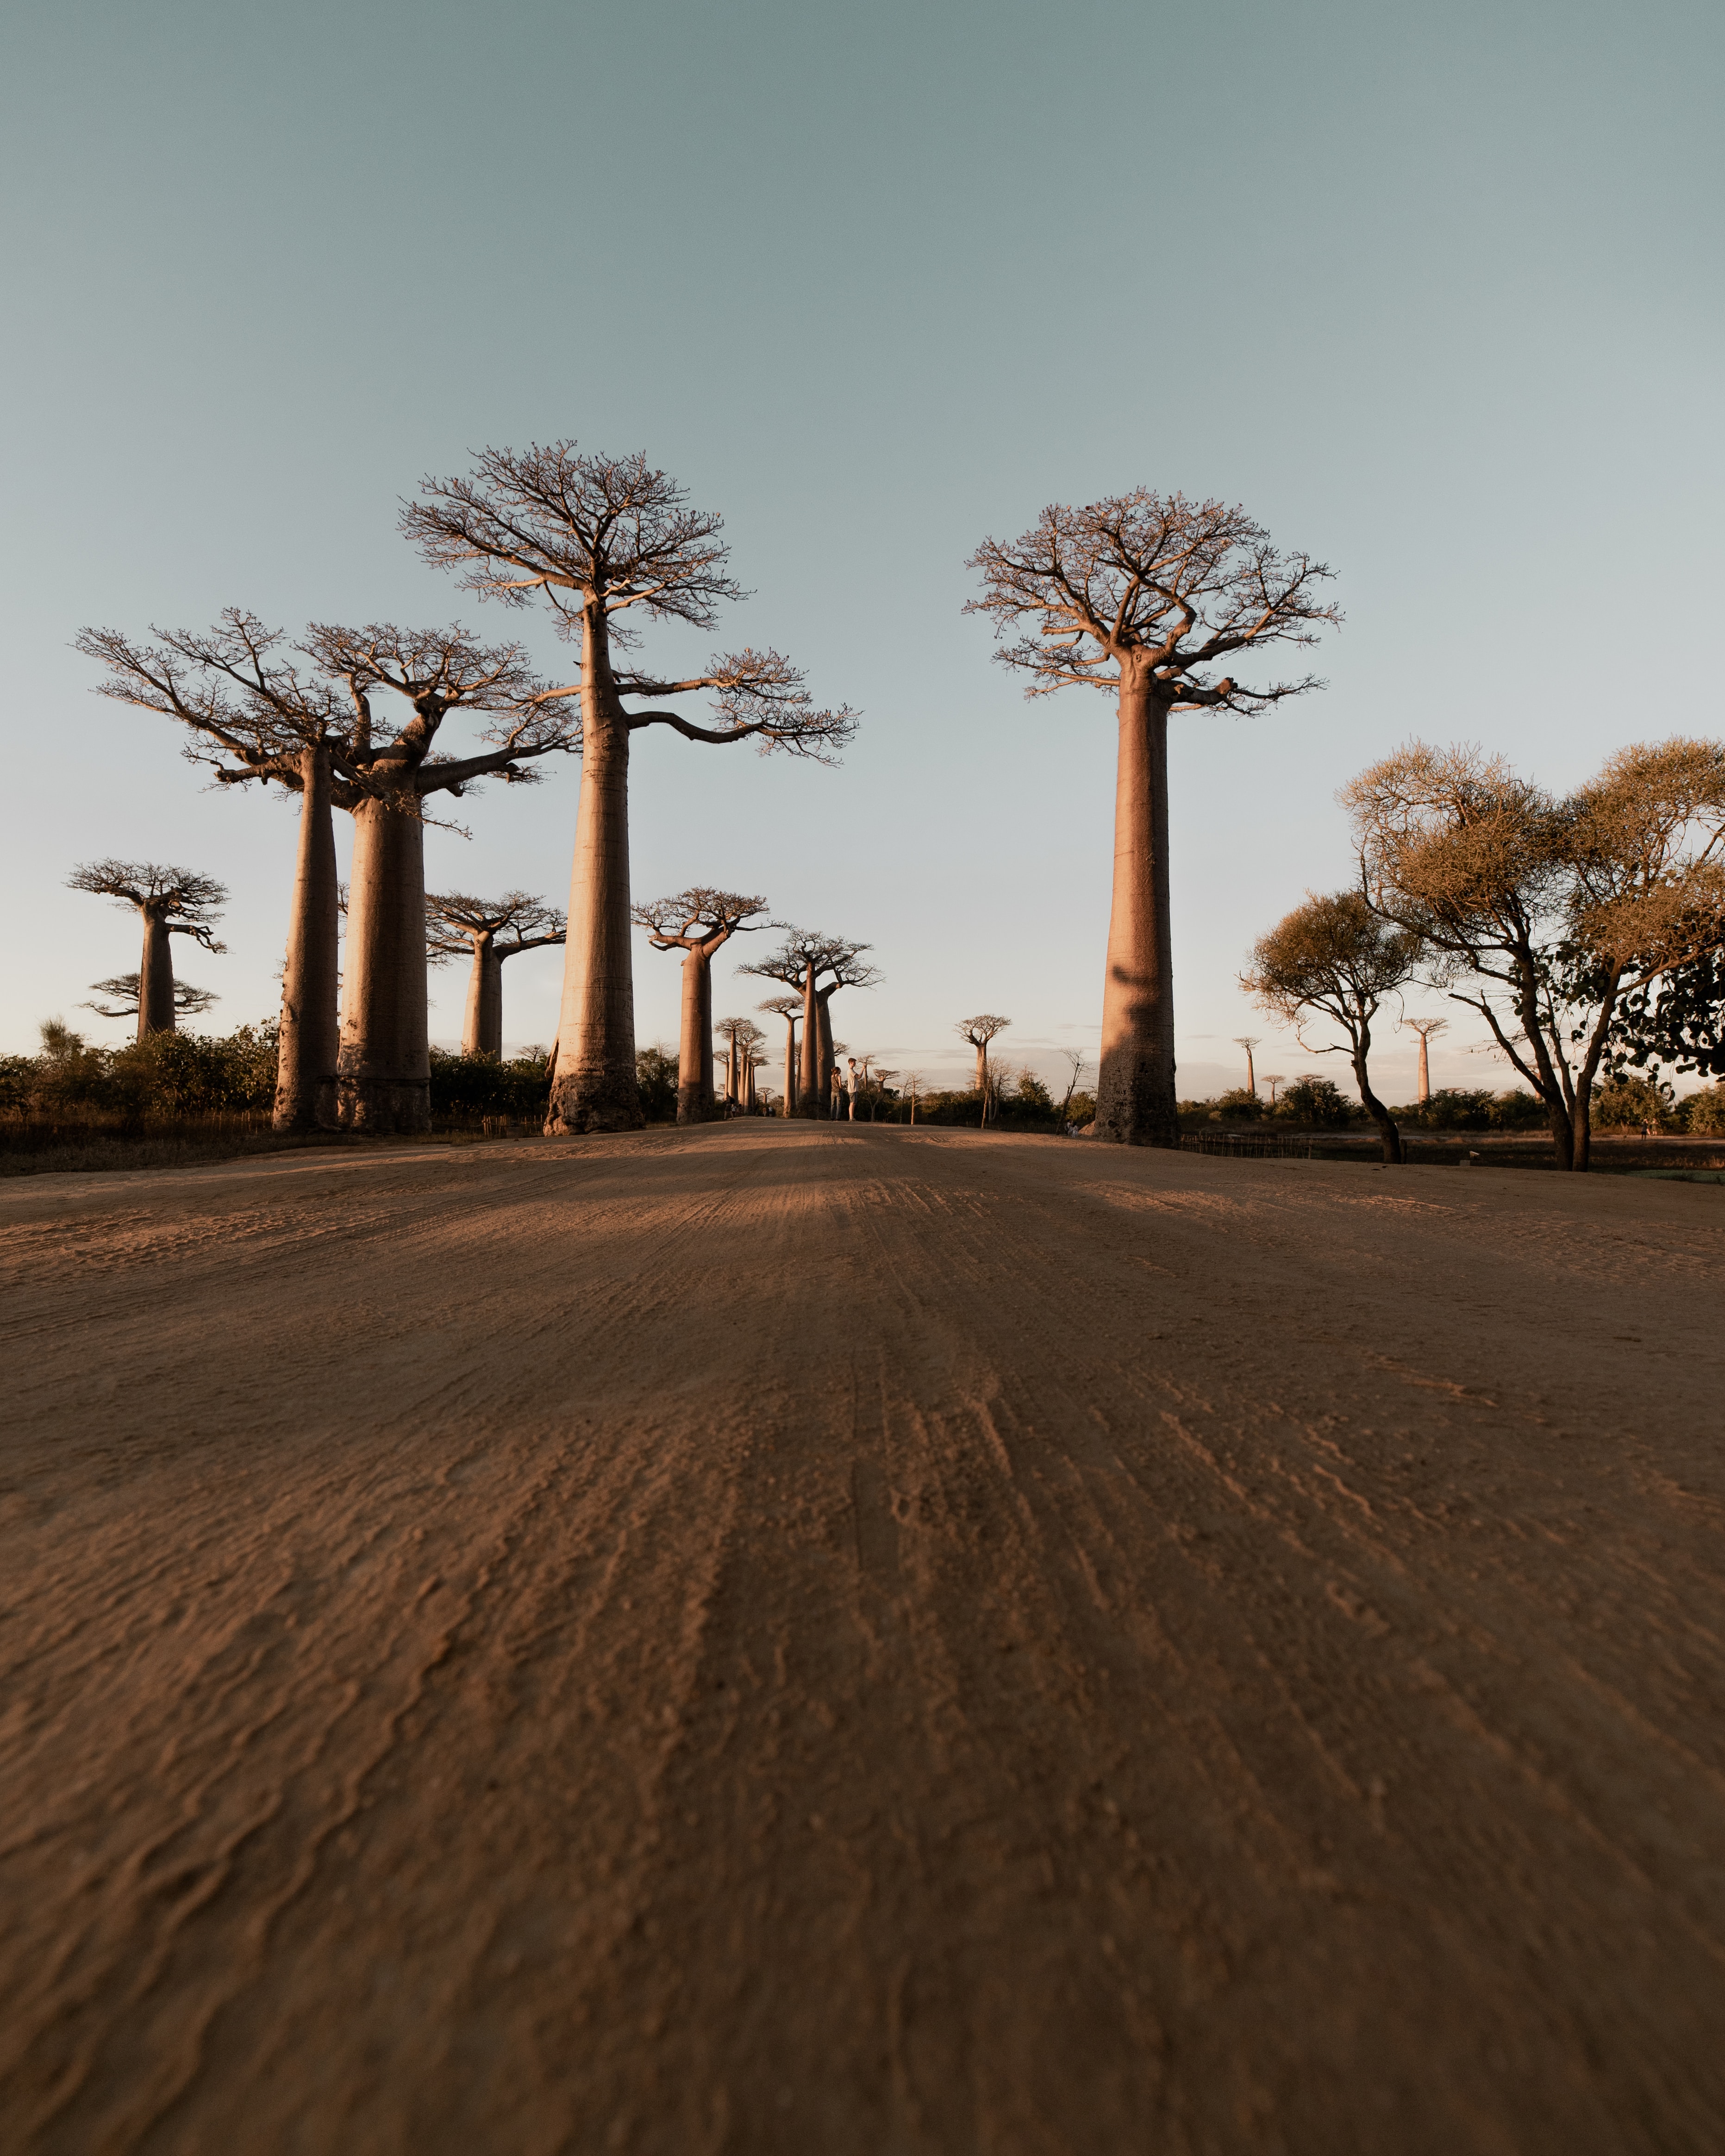 Sitting under the Baobab and discussing 5 link building truths that will help you build backlinks.